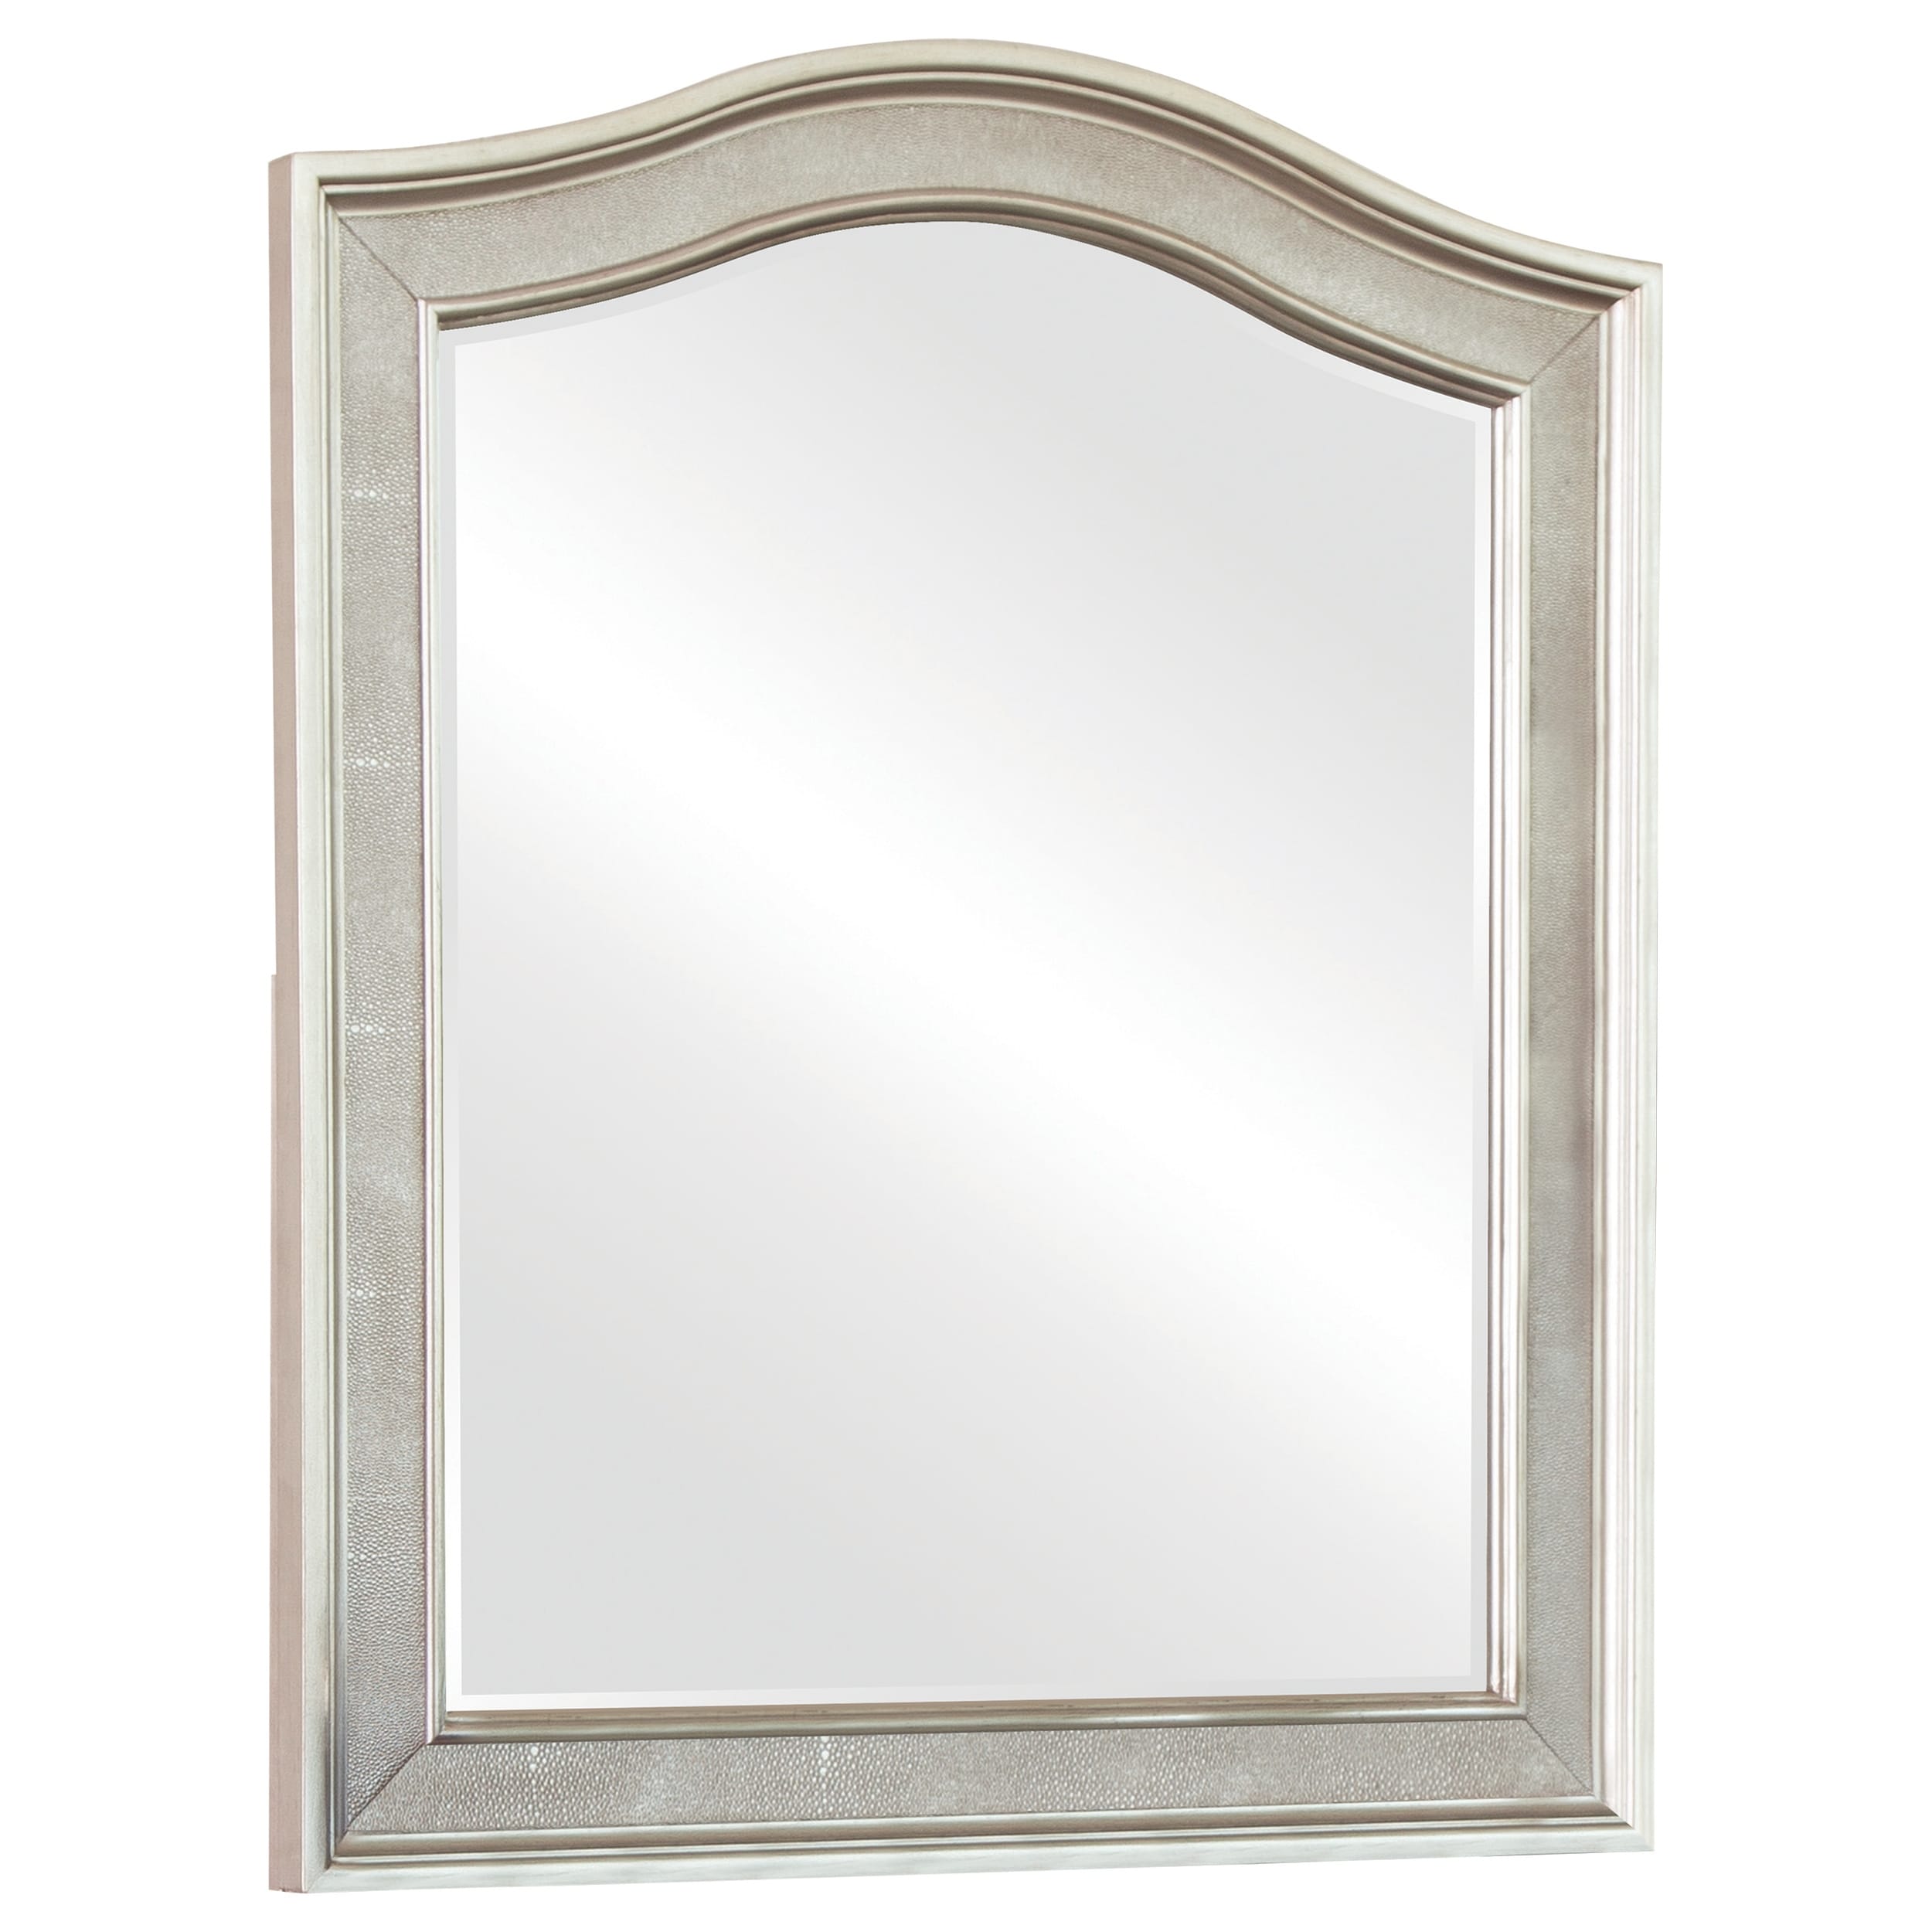 36 Inch Wooden Frame Arched Vanity Mirror, Silver